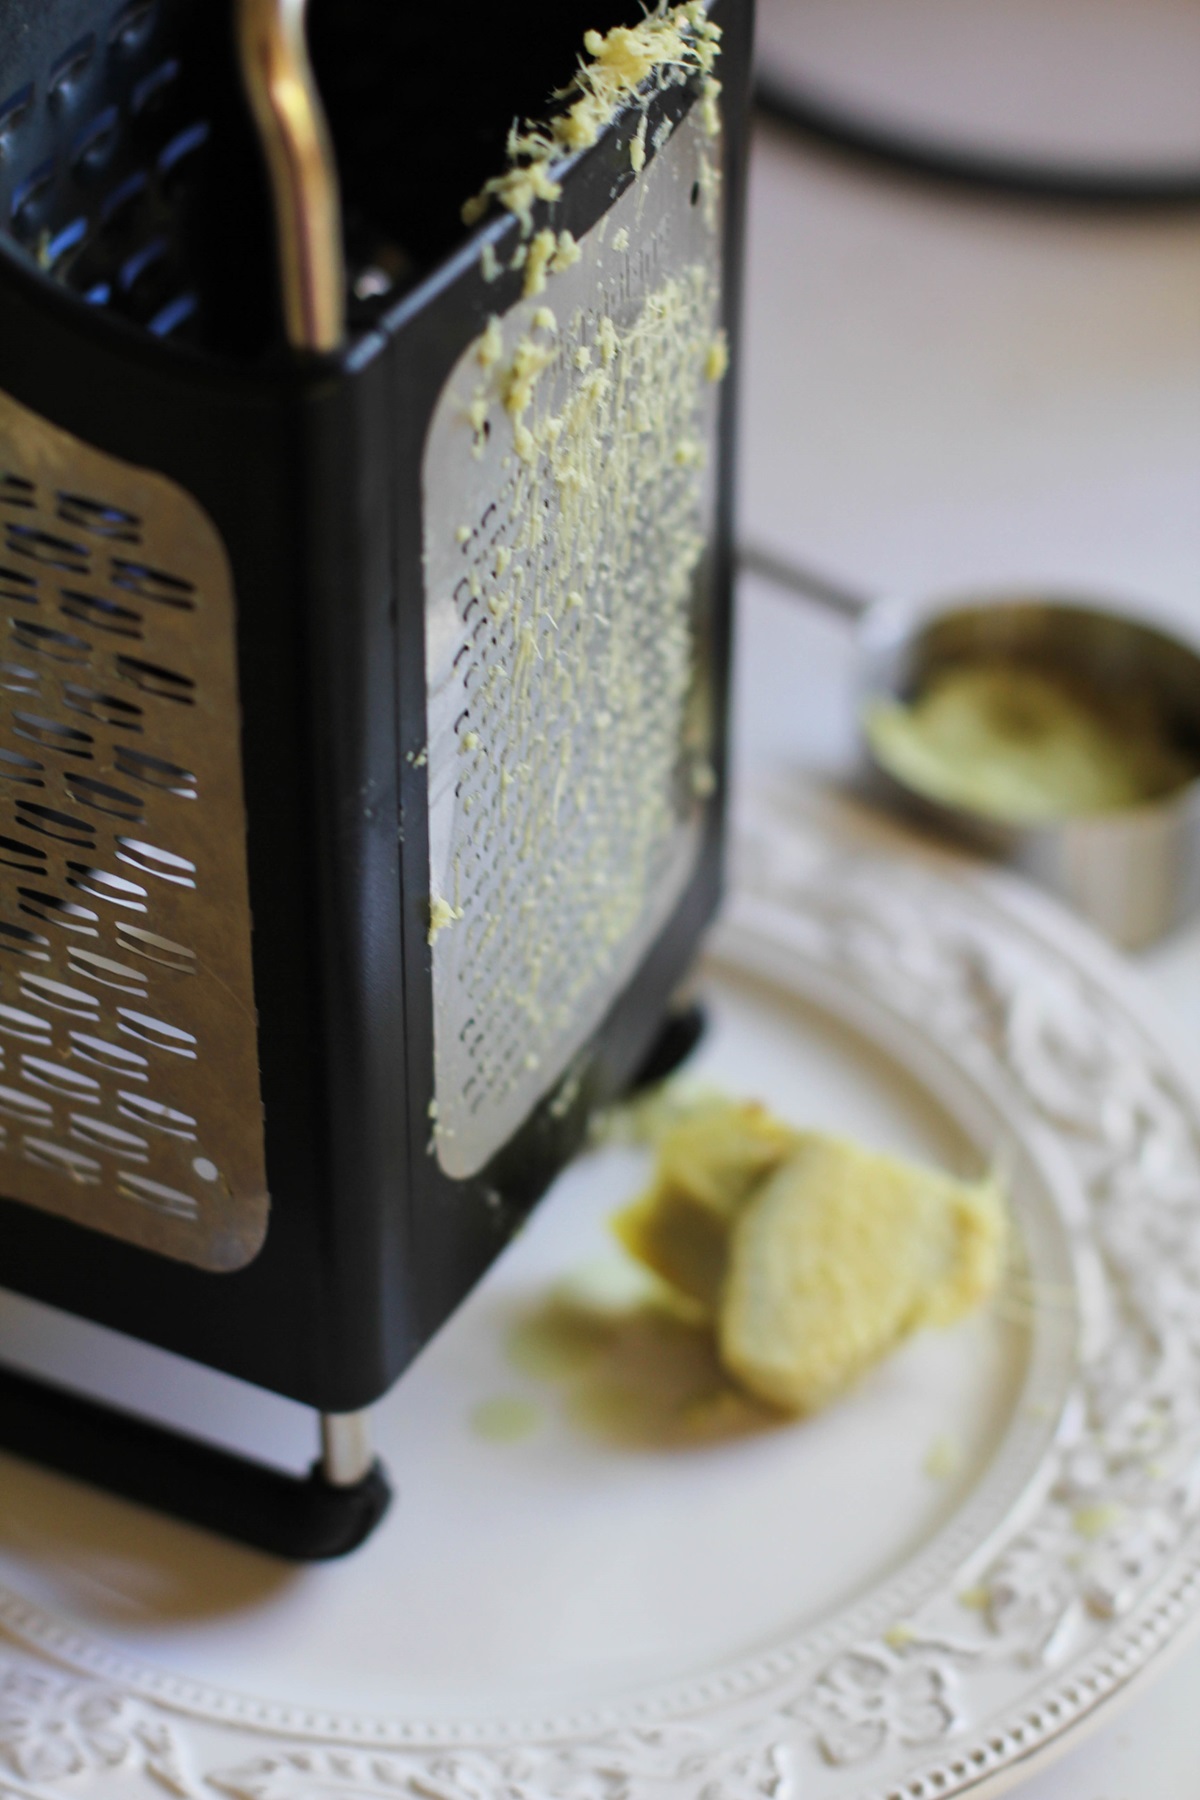 Box grater on a plate with fresh ginger grated on it